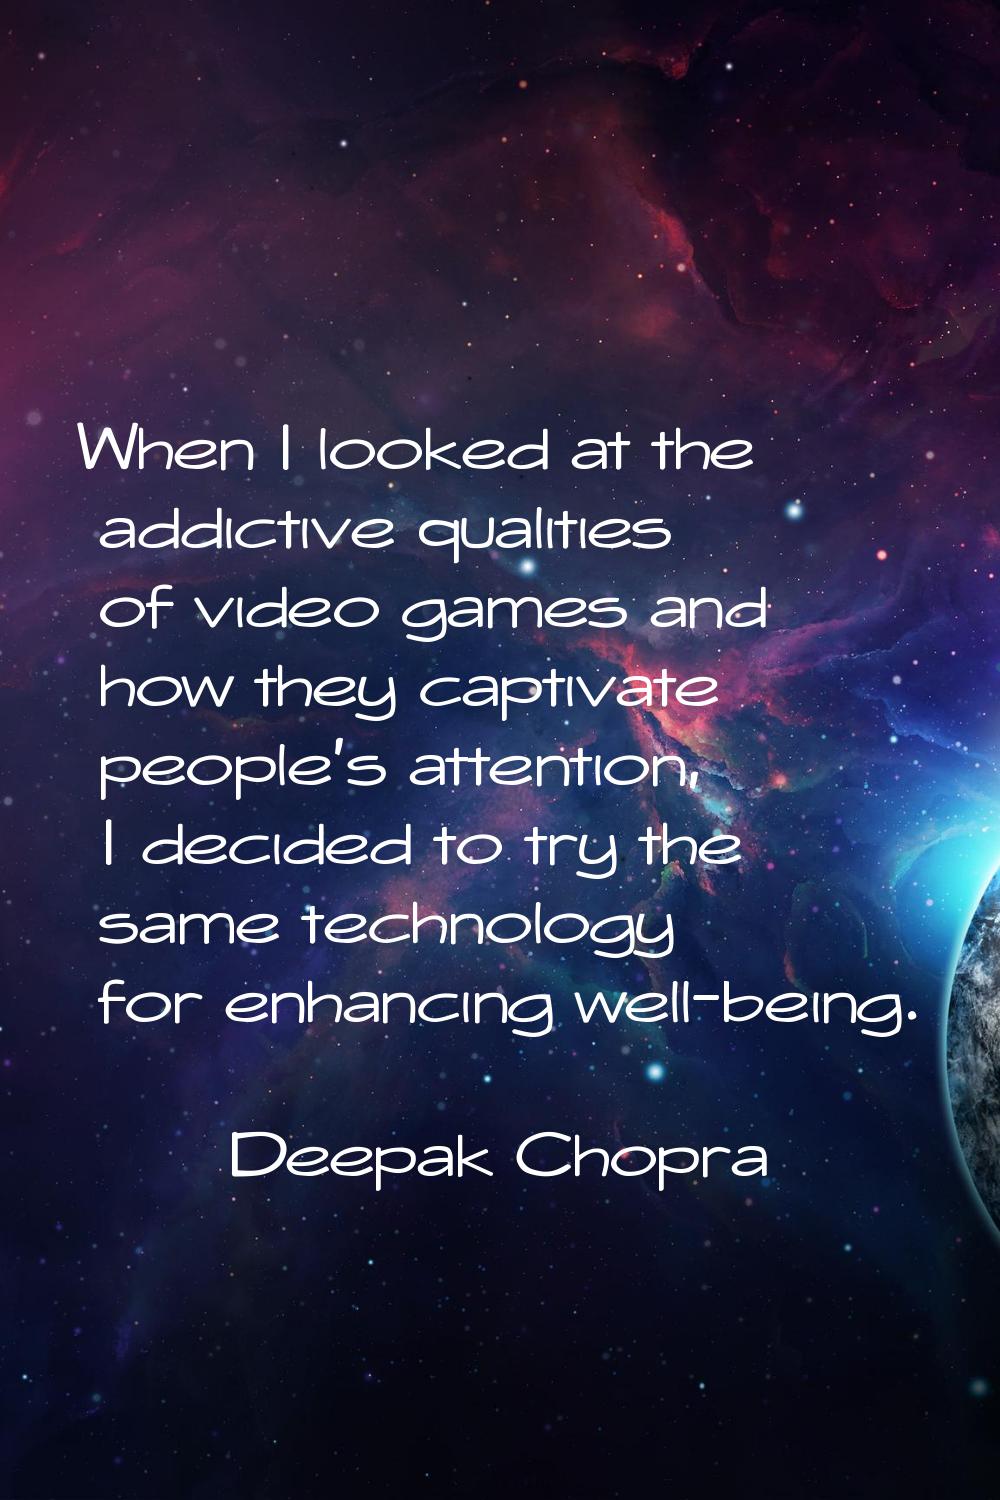 When I looked at the addictive qualities of video games and how they captivate people's attention, 